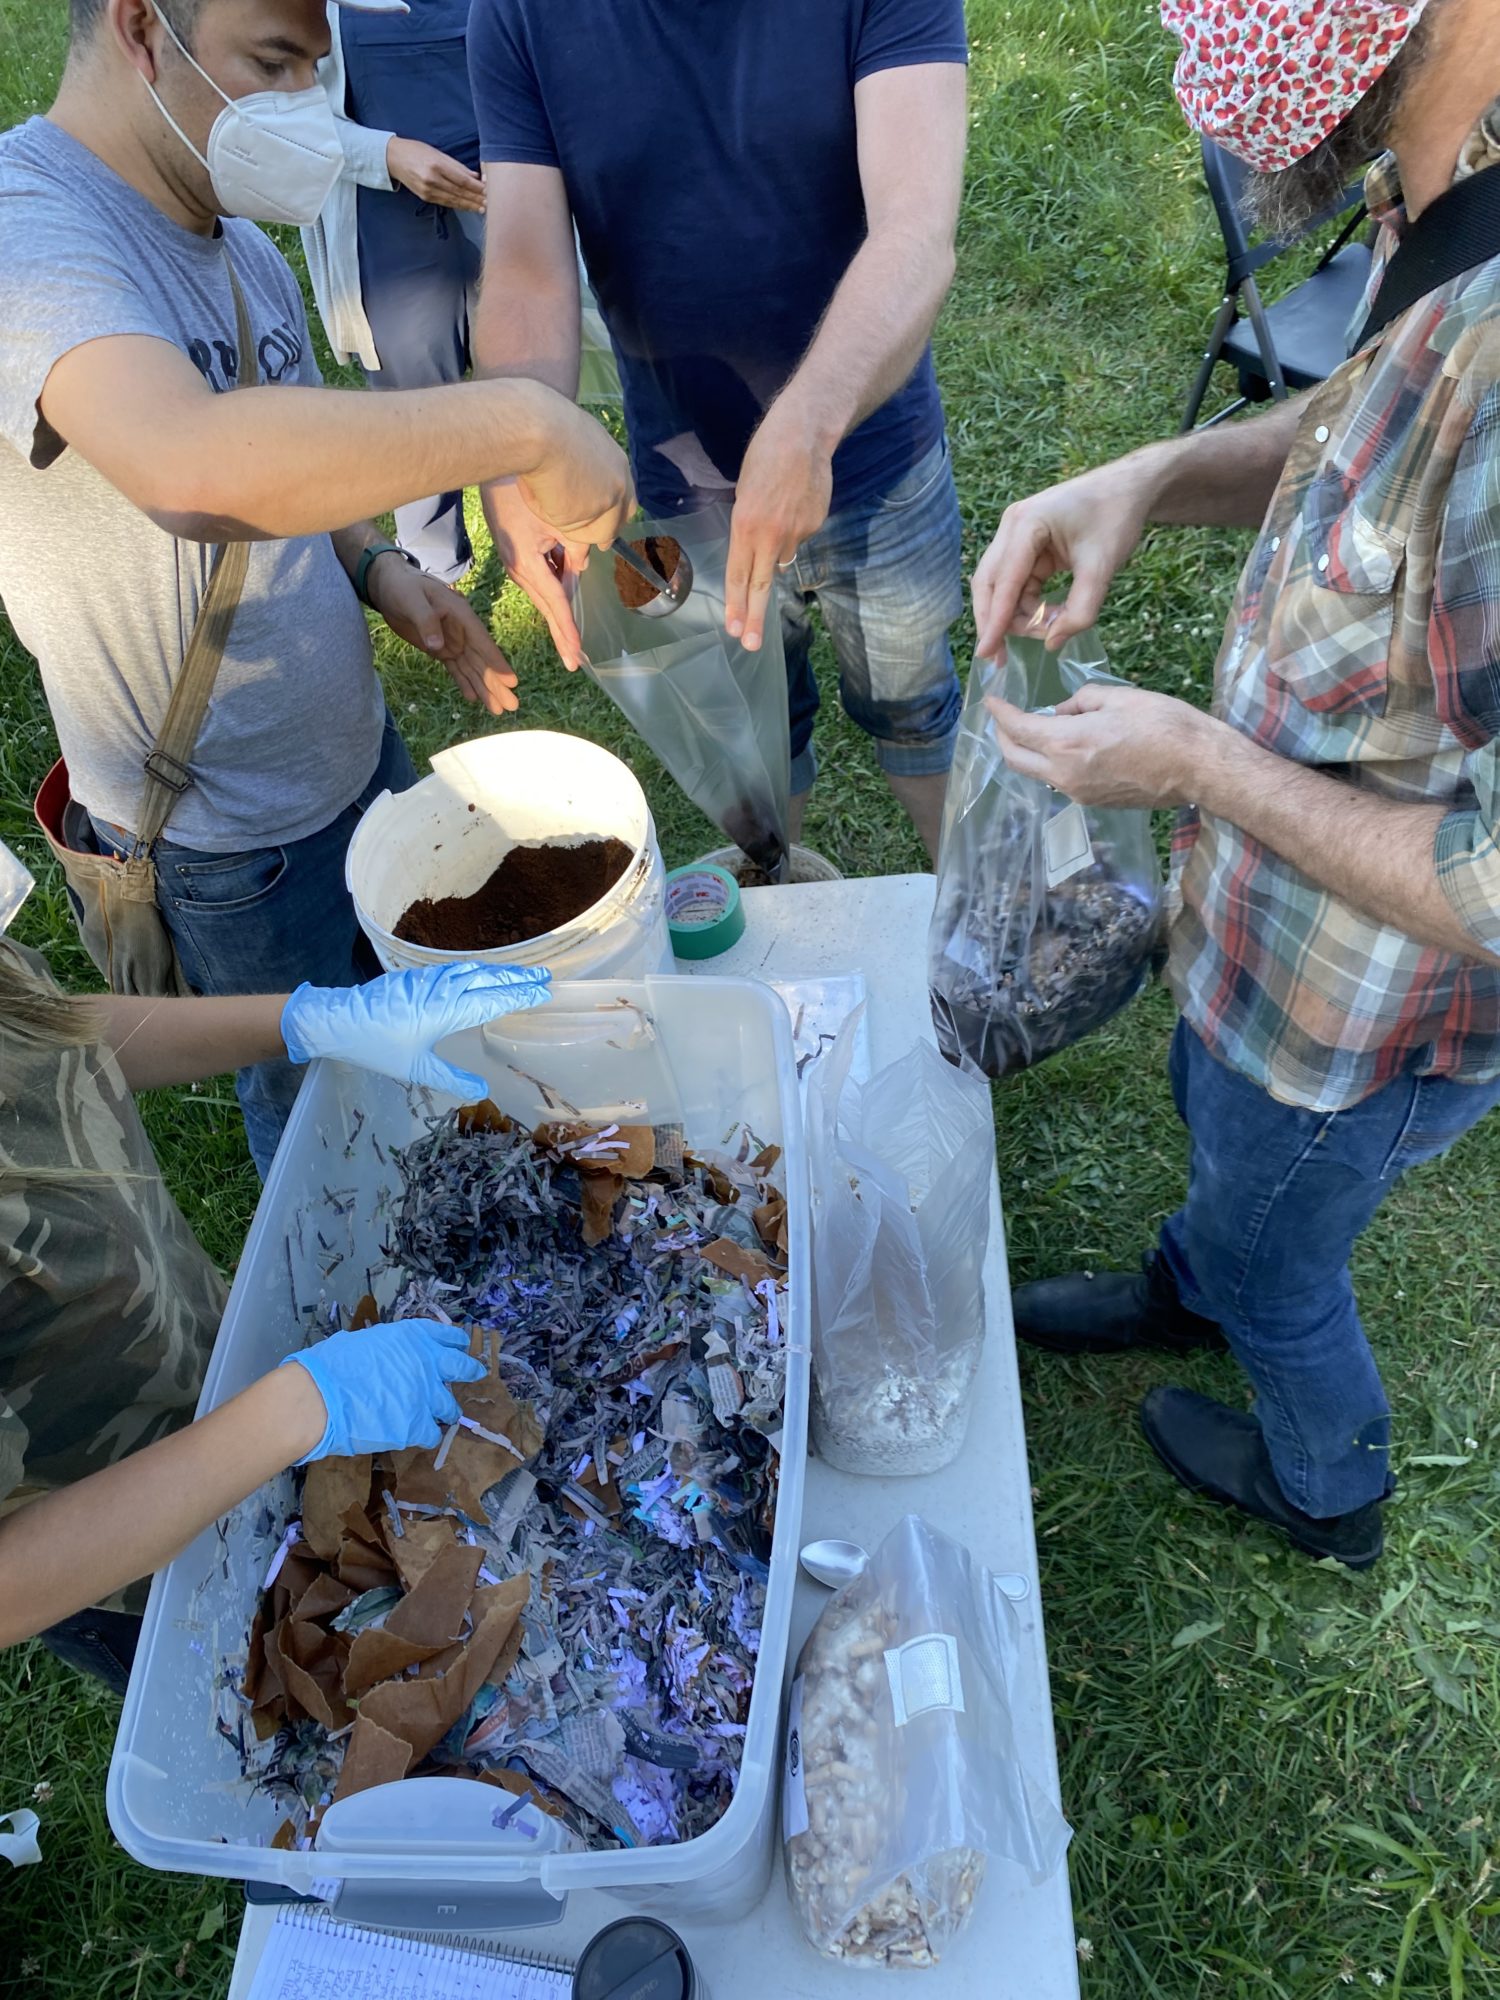 Workshop attendees fill their grow bags with a substrate of spent coffee grounds and shredded paper. Photo credit: Tirzah Vogels.